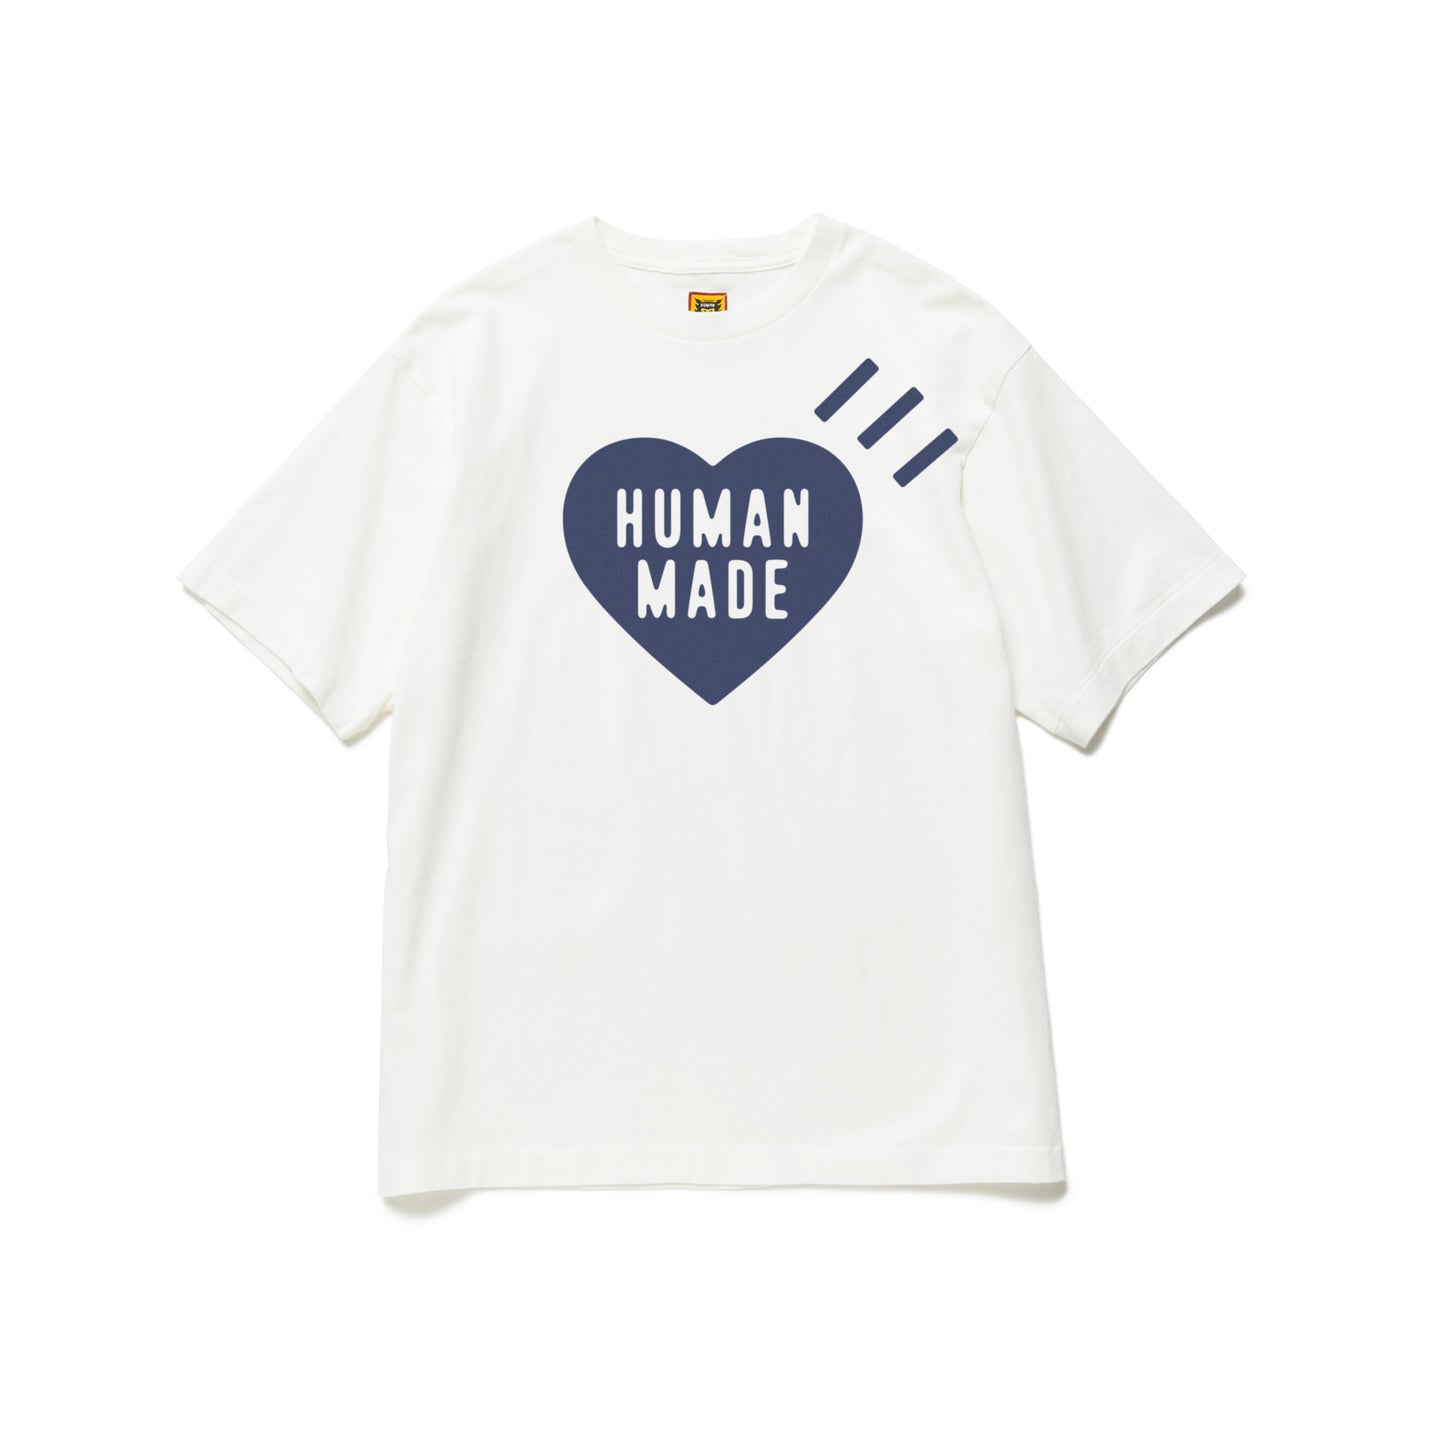 HUMAN MADE  DAILY L/S T-SHIRT 2024.3/30270330